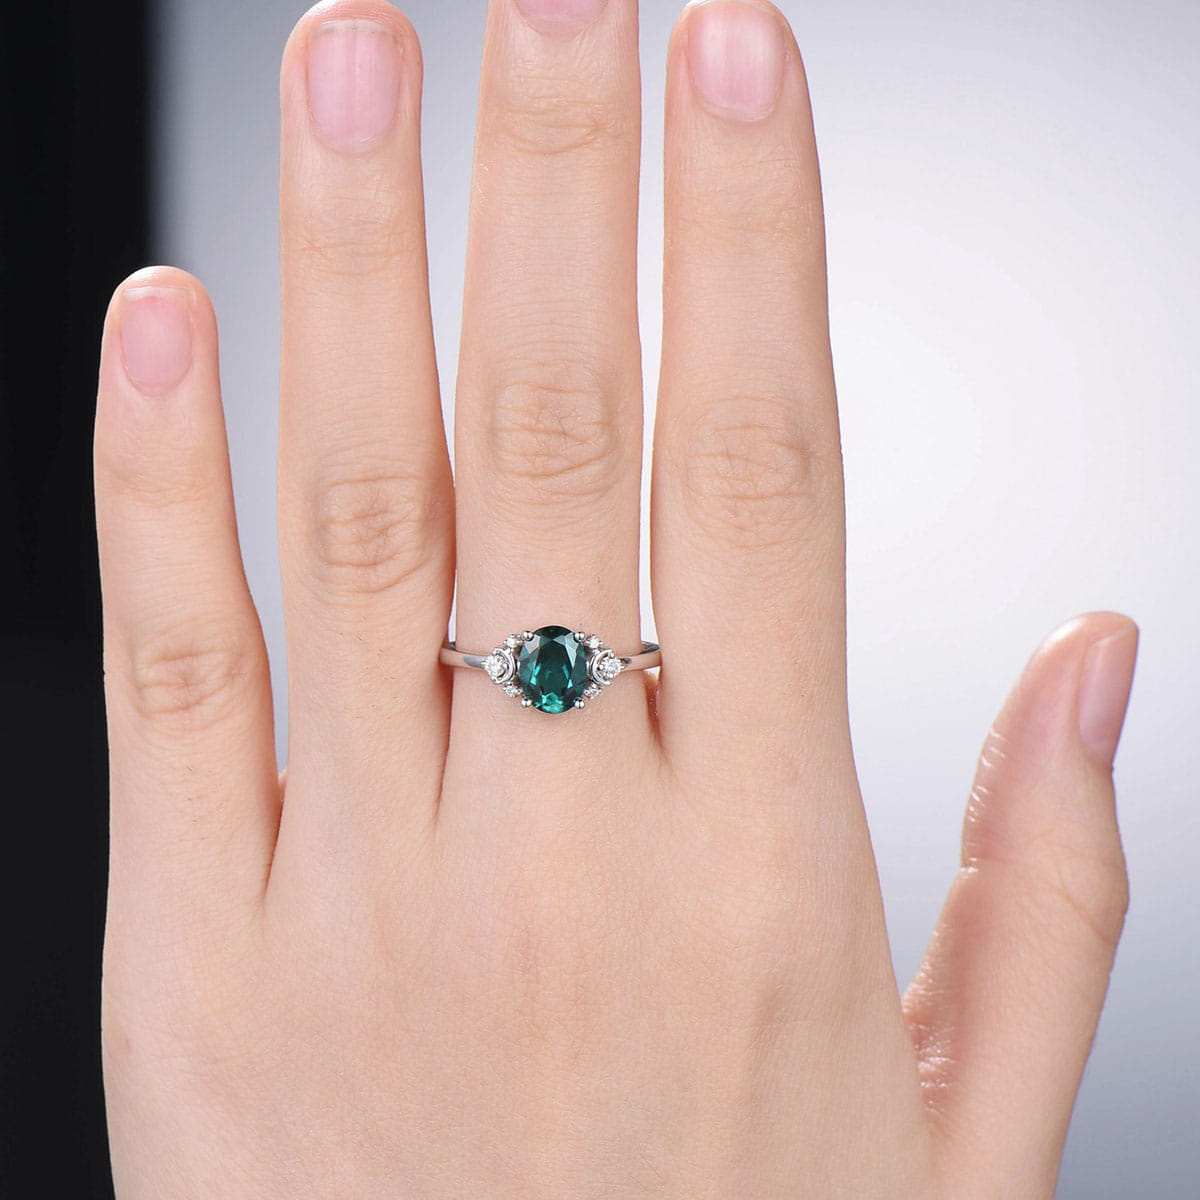 Vintage Emerald Engagement Ring Unique Nature Inspired Moon Green Crystal Ring Unique Alternative May birthstone Wedding Ring For Women - PENFINE